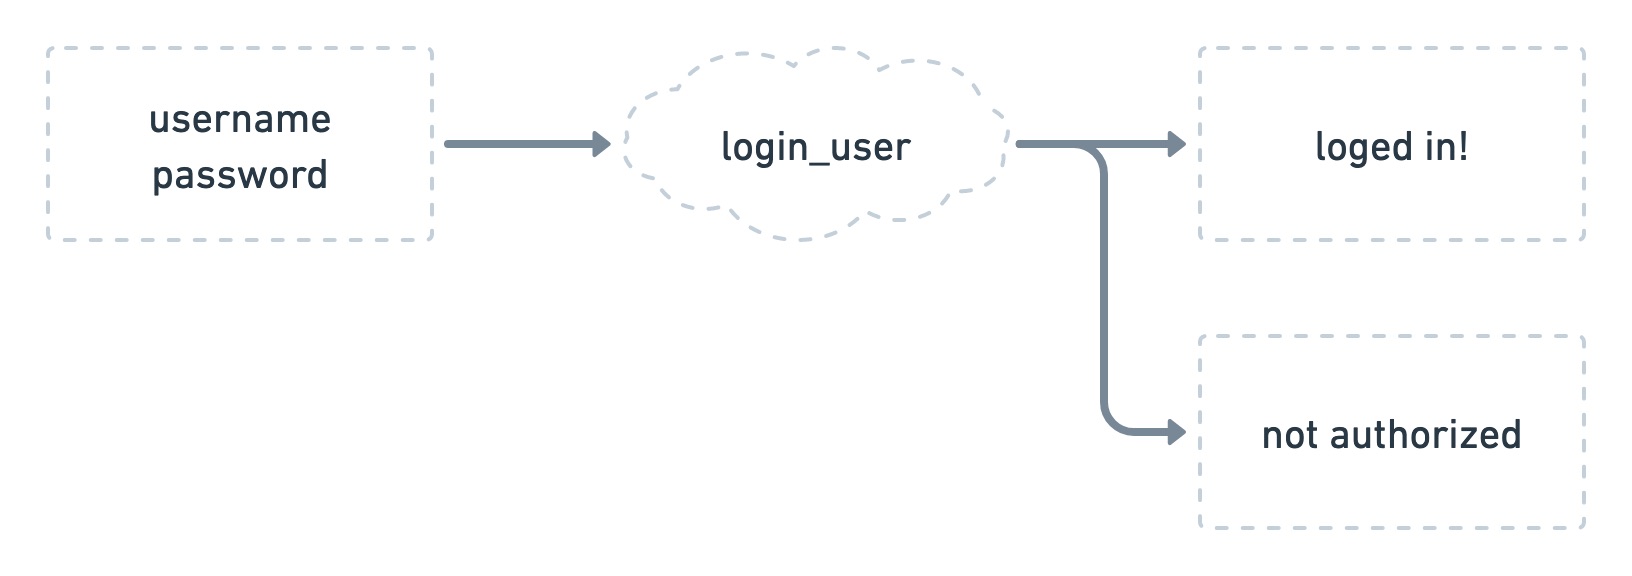 A diagram showing a rectangle with the name username and passowrd with an arrow to the next rectangle called login_user that can go to two directions: a rectangle saying Logged in! or a rectangle saying not authorized